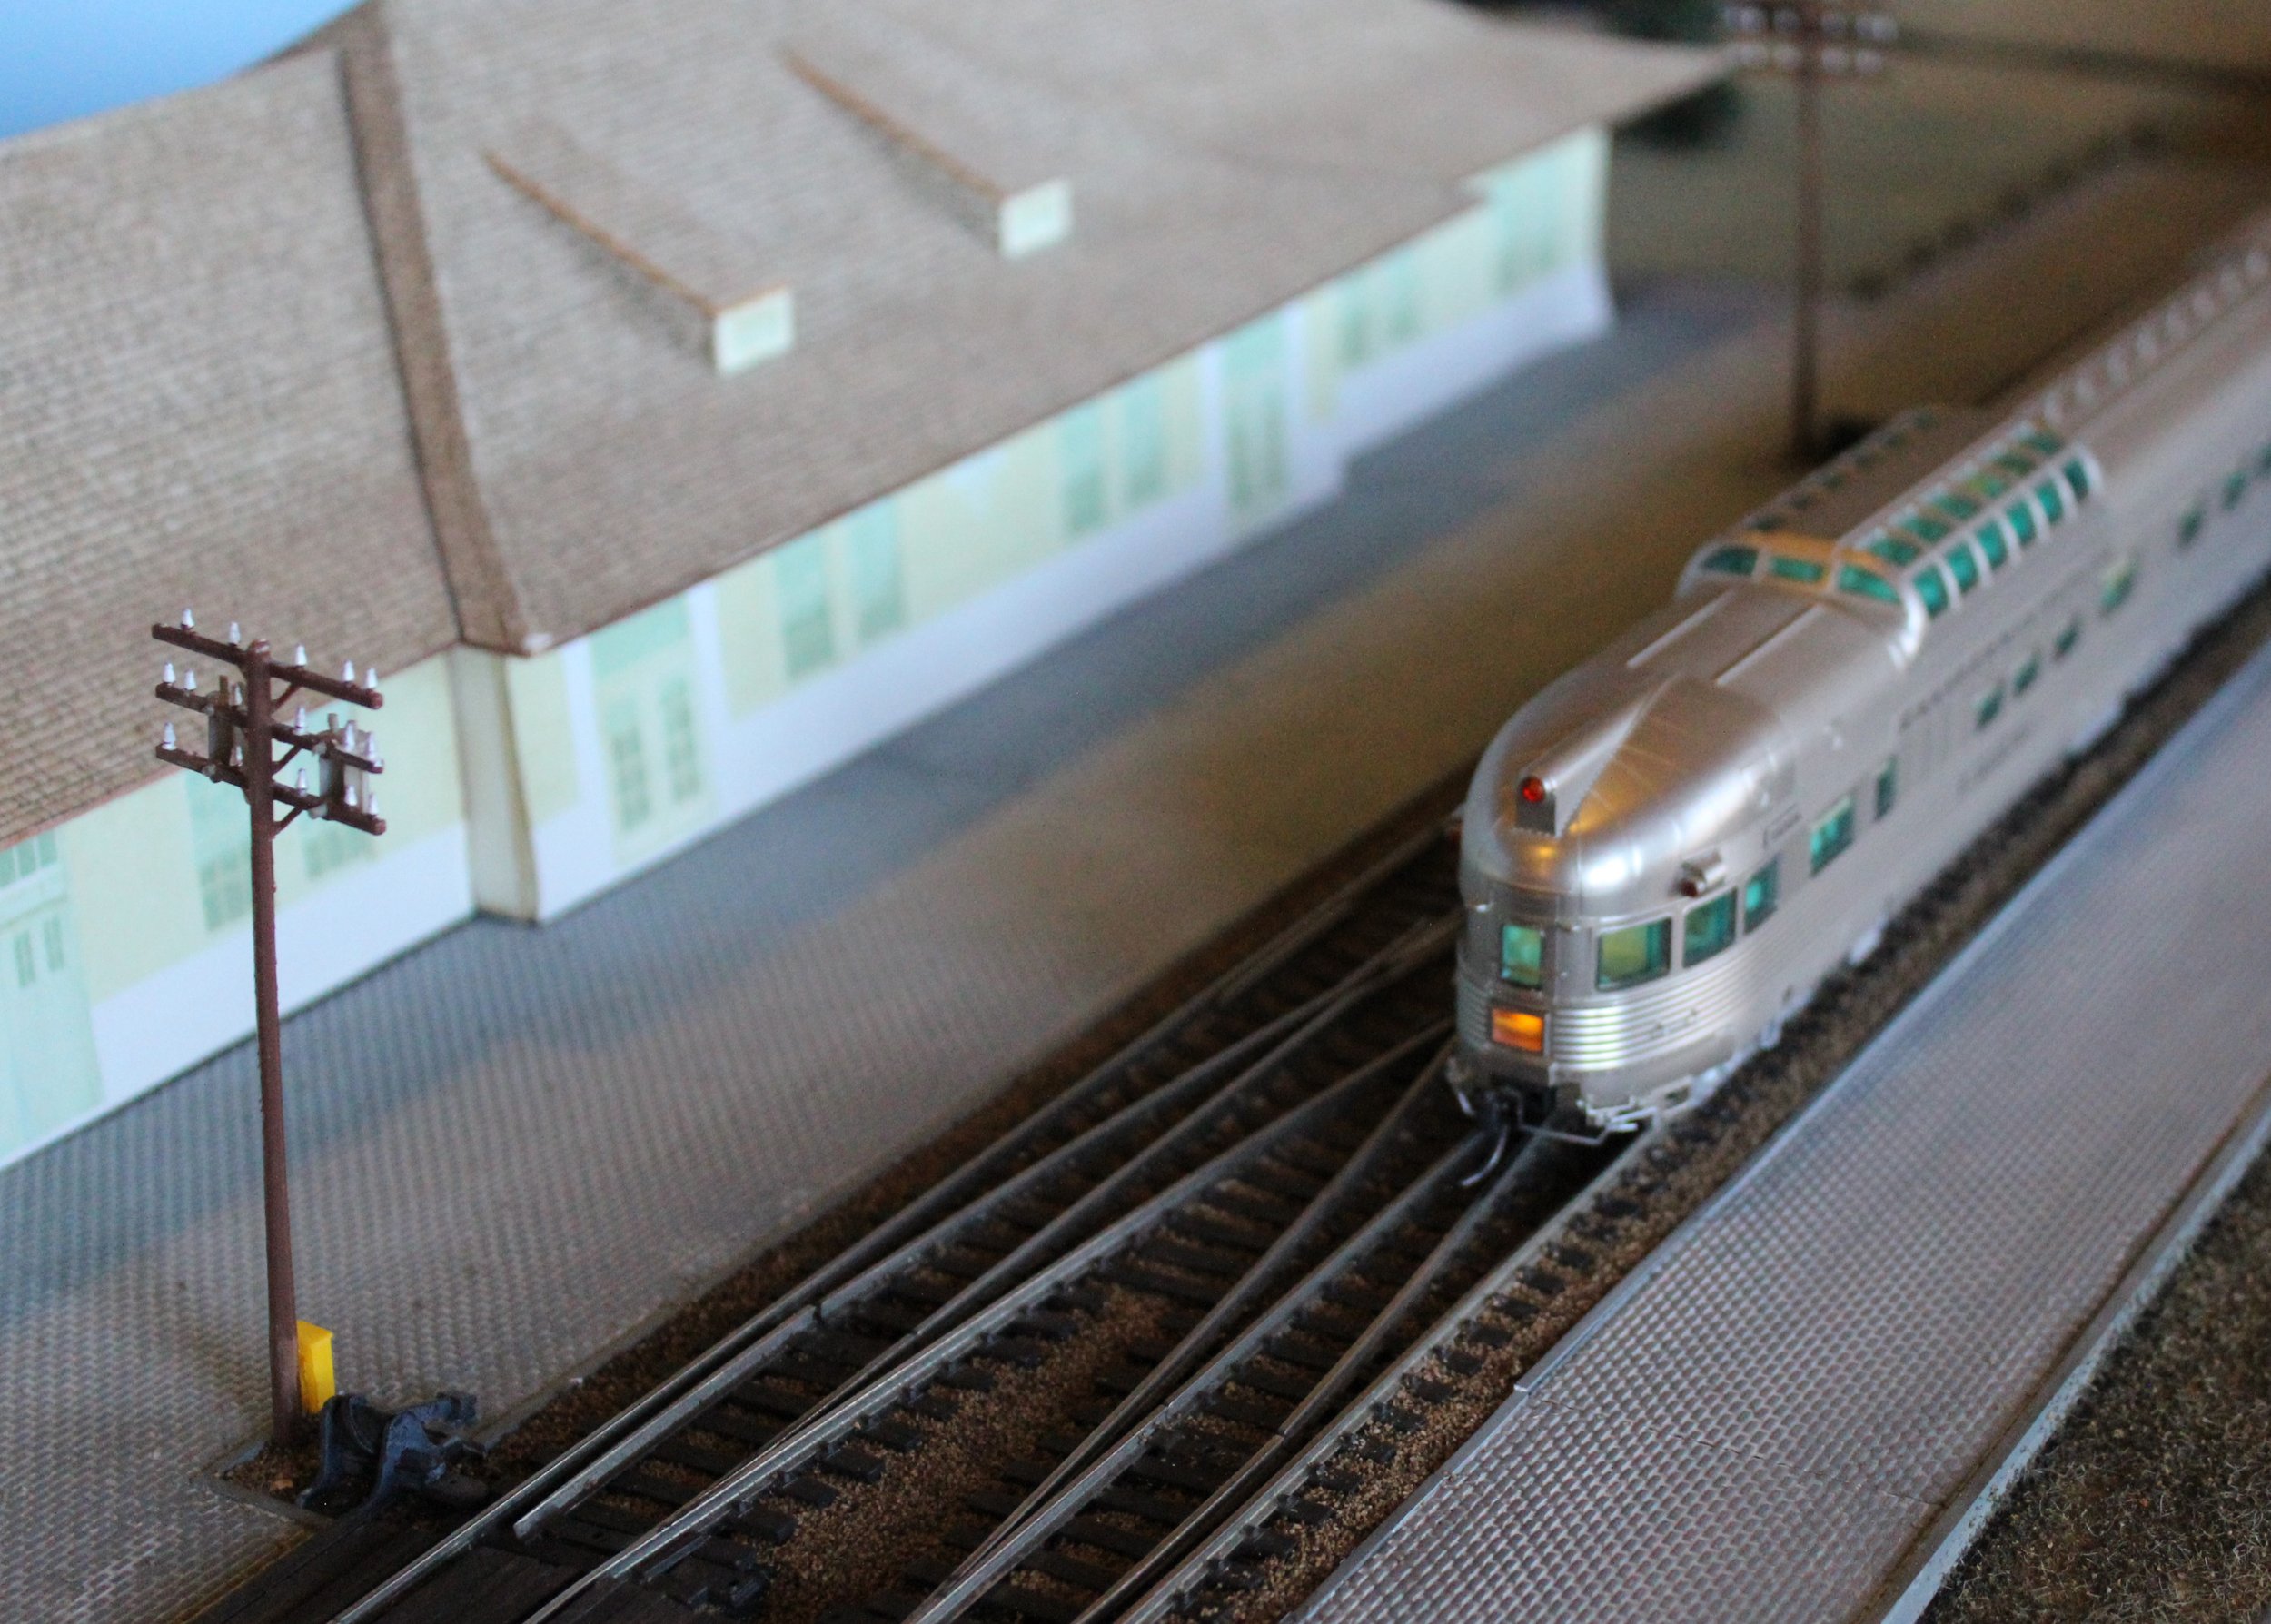 Zephyr passing the depot